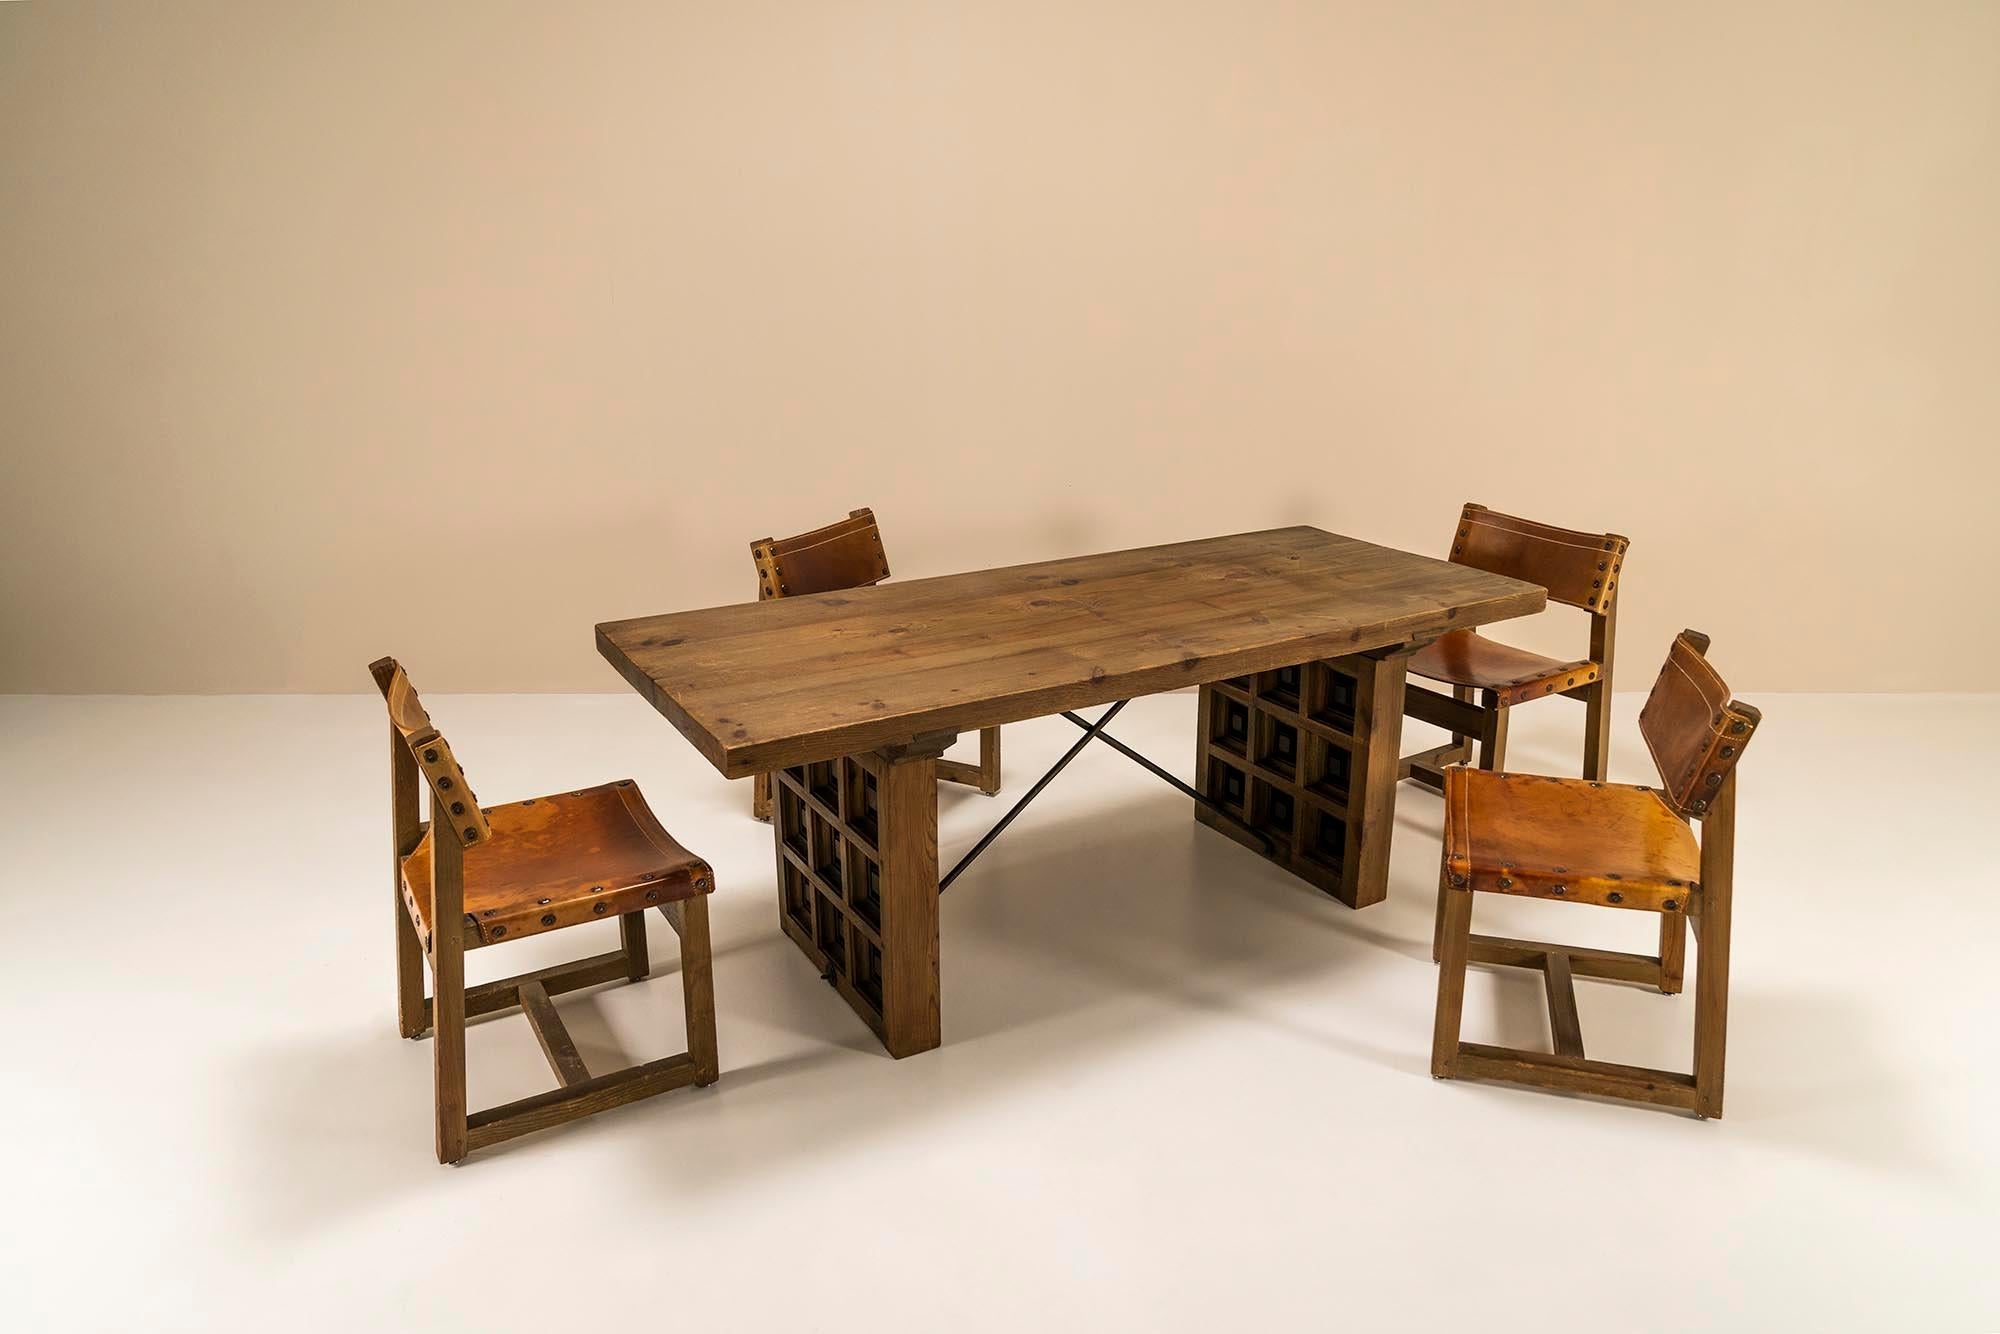 Spanish Biosca Dining Table With Geometric Patterns In Pine, Spain 1960s For Sale